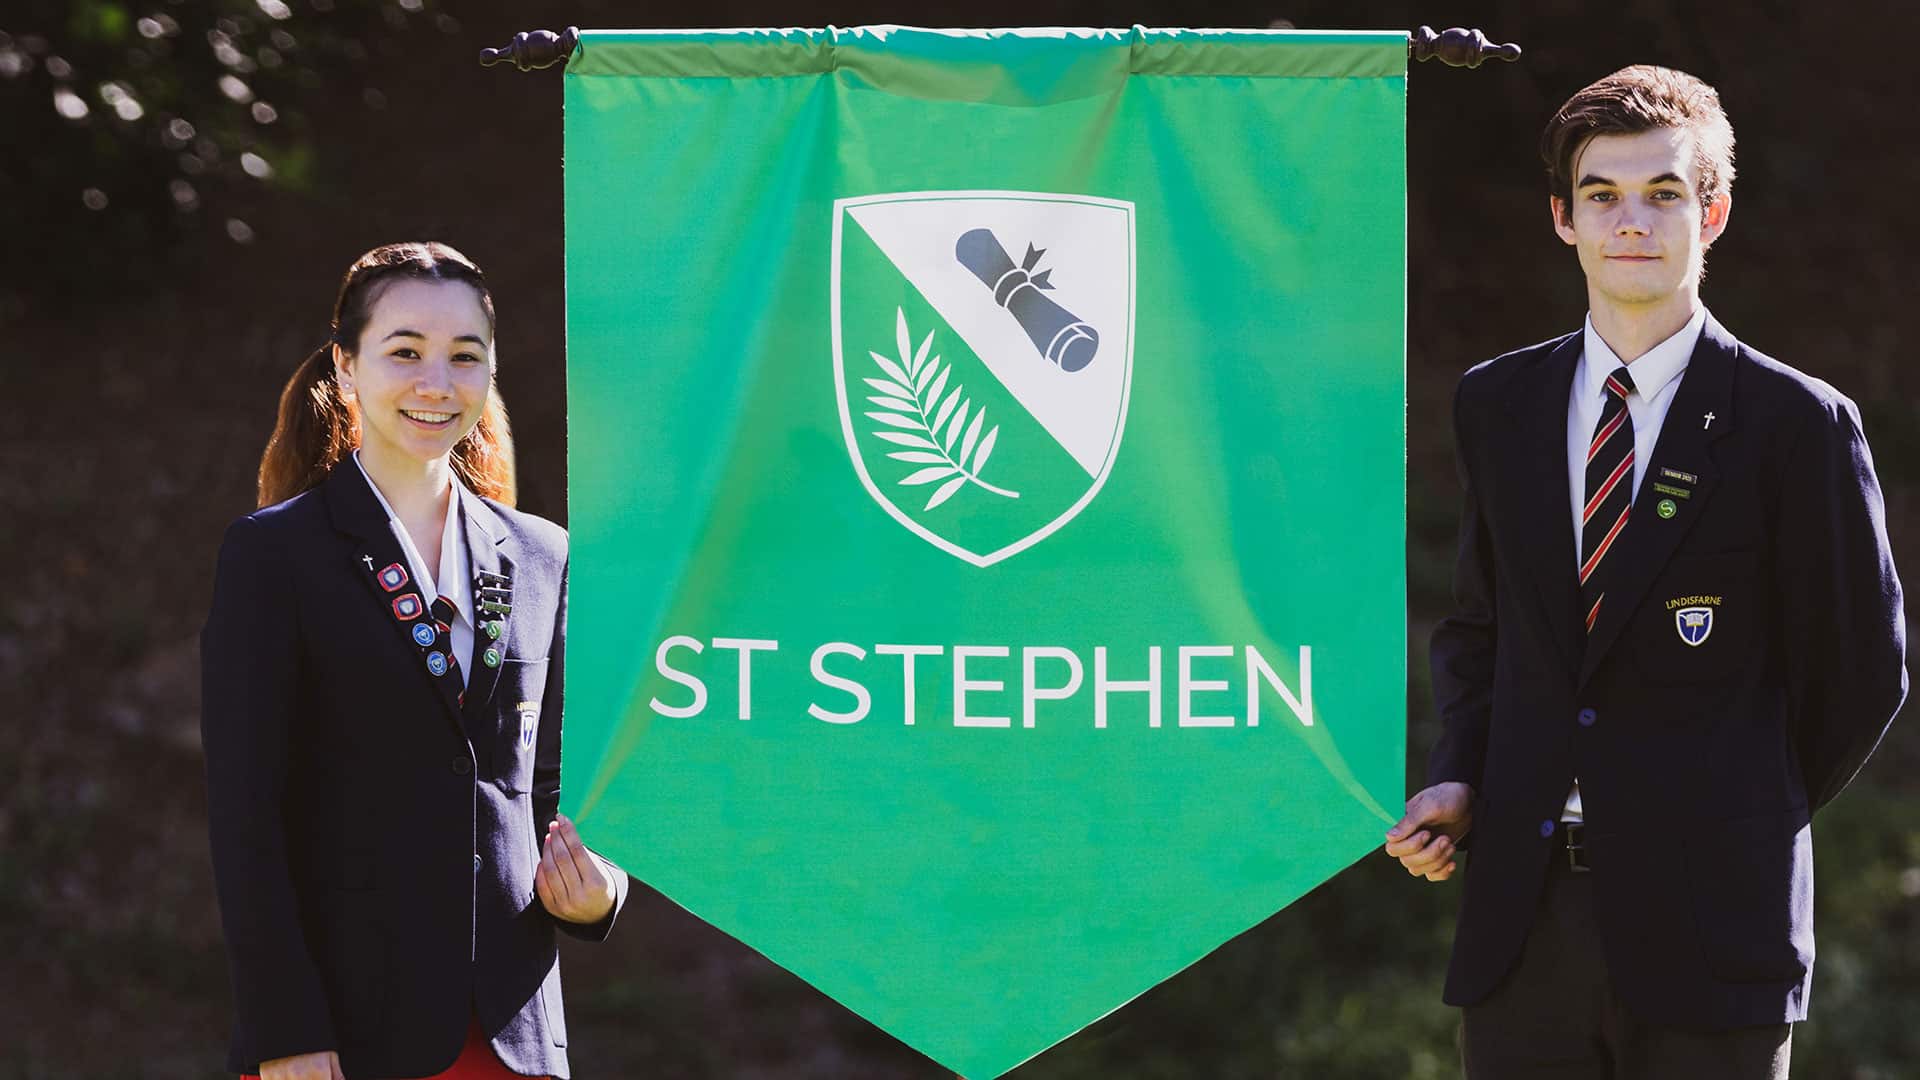 The new St Stephen house banner